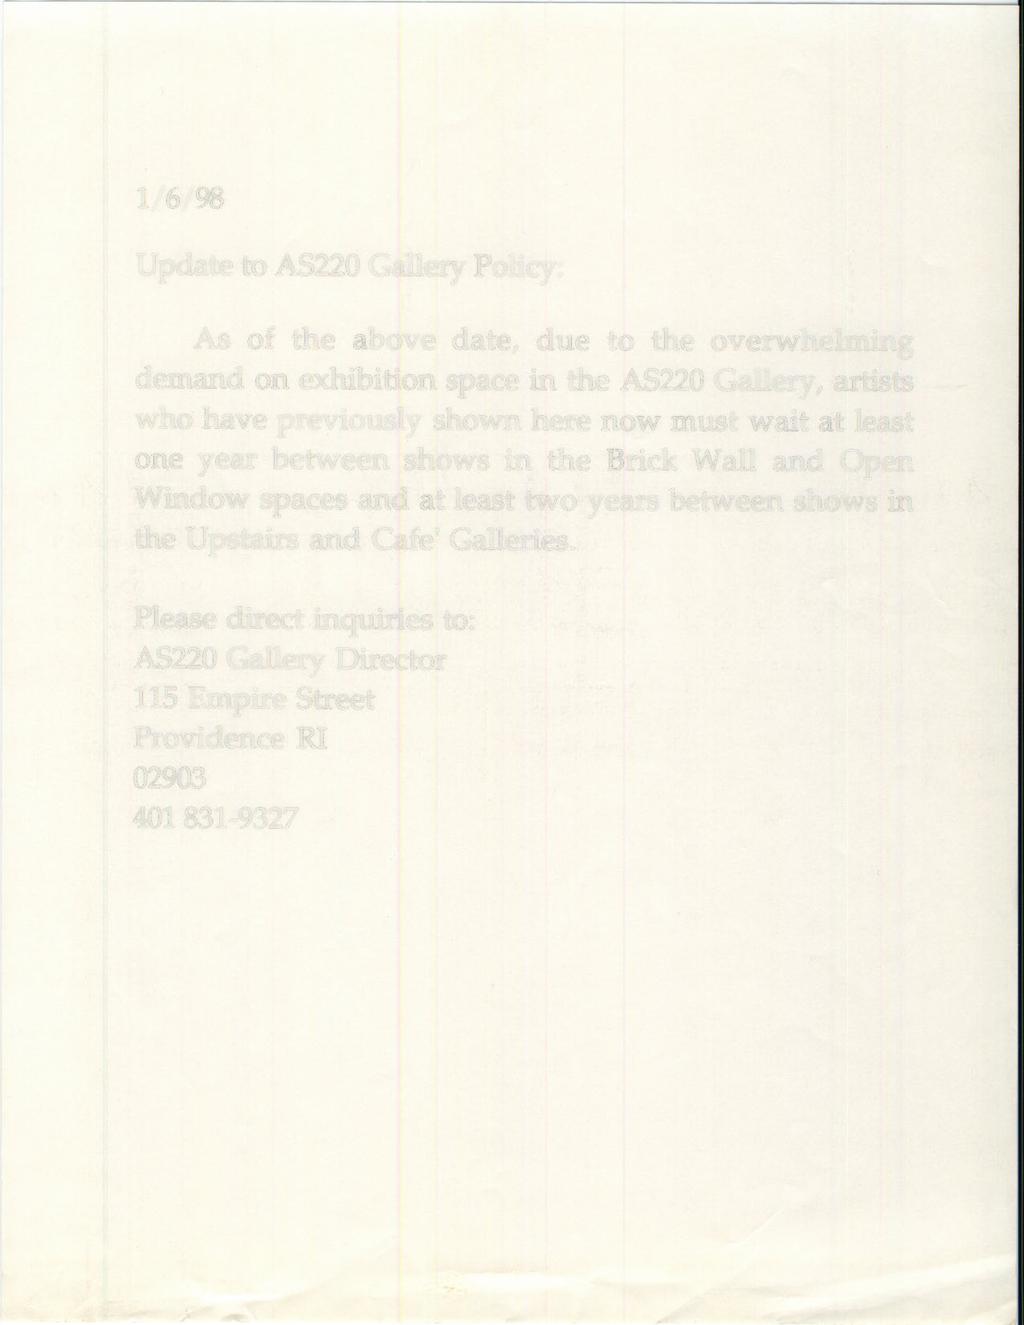 1/6/98 Update to AS220 Gallery Policy: As of the above date, due to the